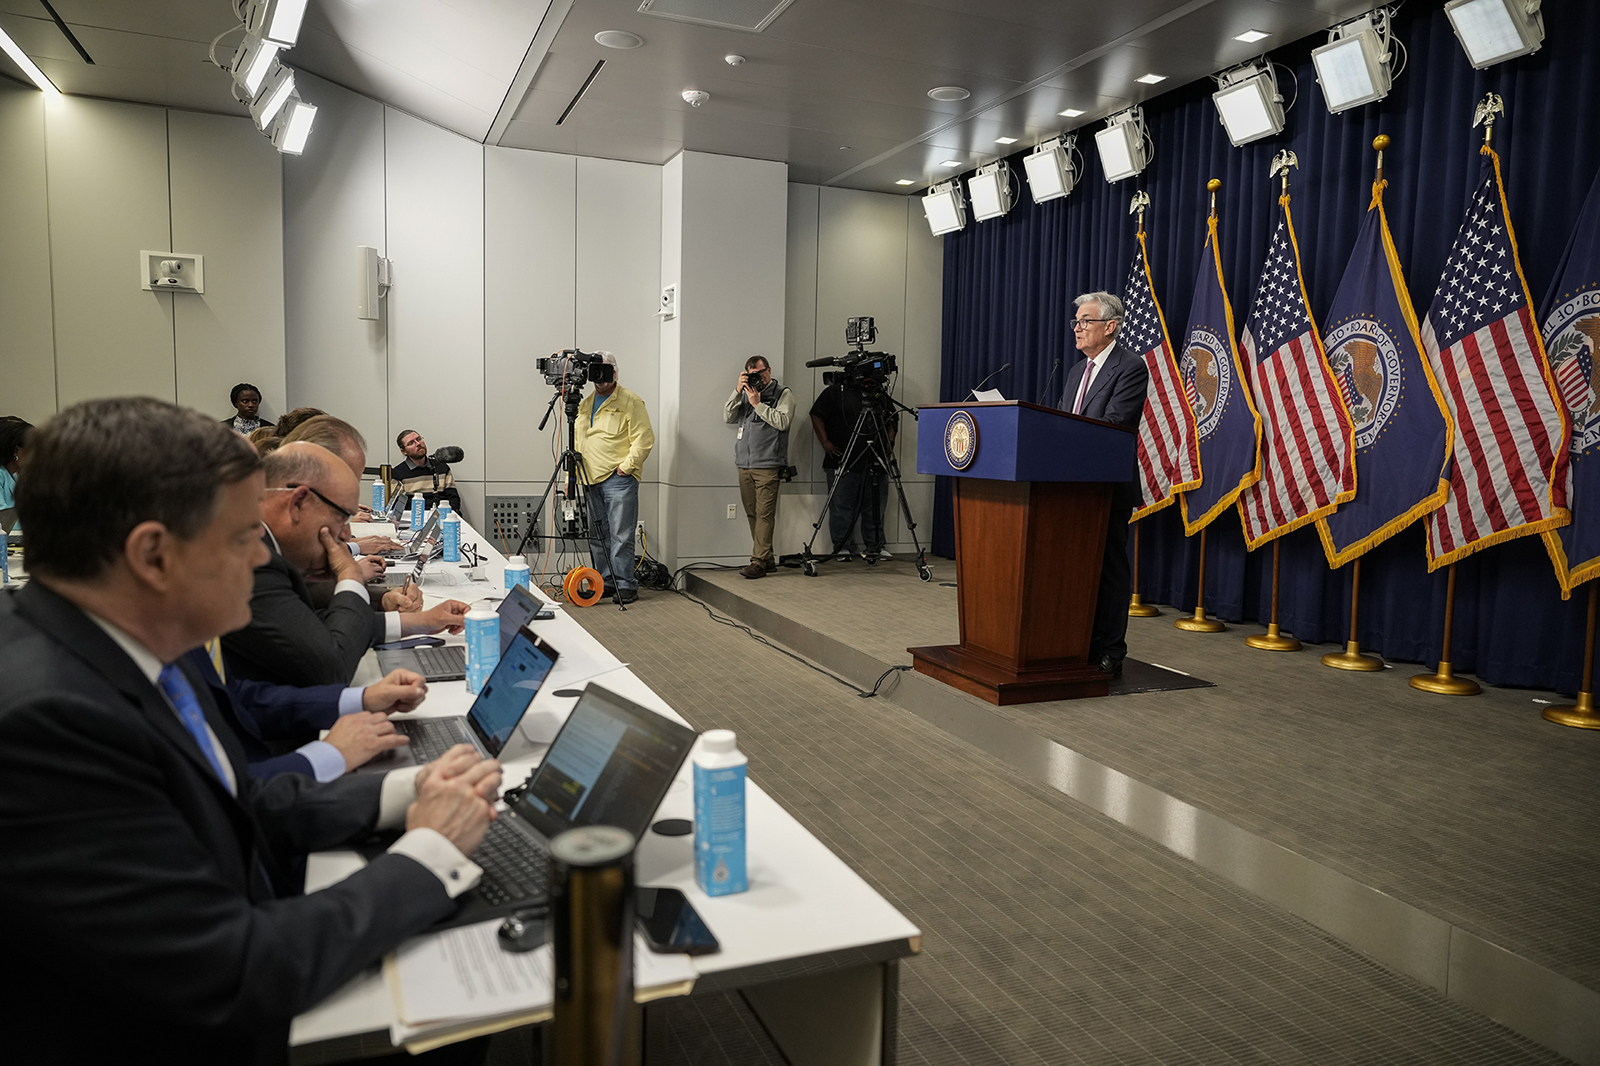 U.S. Federal Reserve Board Chairman Jerome Powell spoke during a news conference following a meeting of the Federal Open Market Committee (FOMC) at the headquarters of the Federal Reserve today.